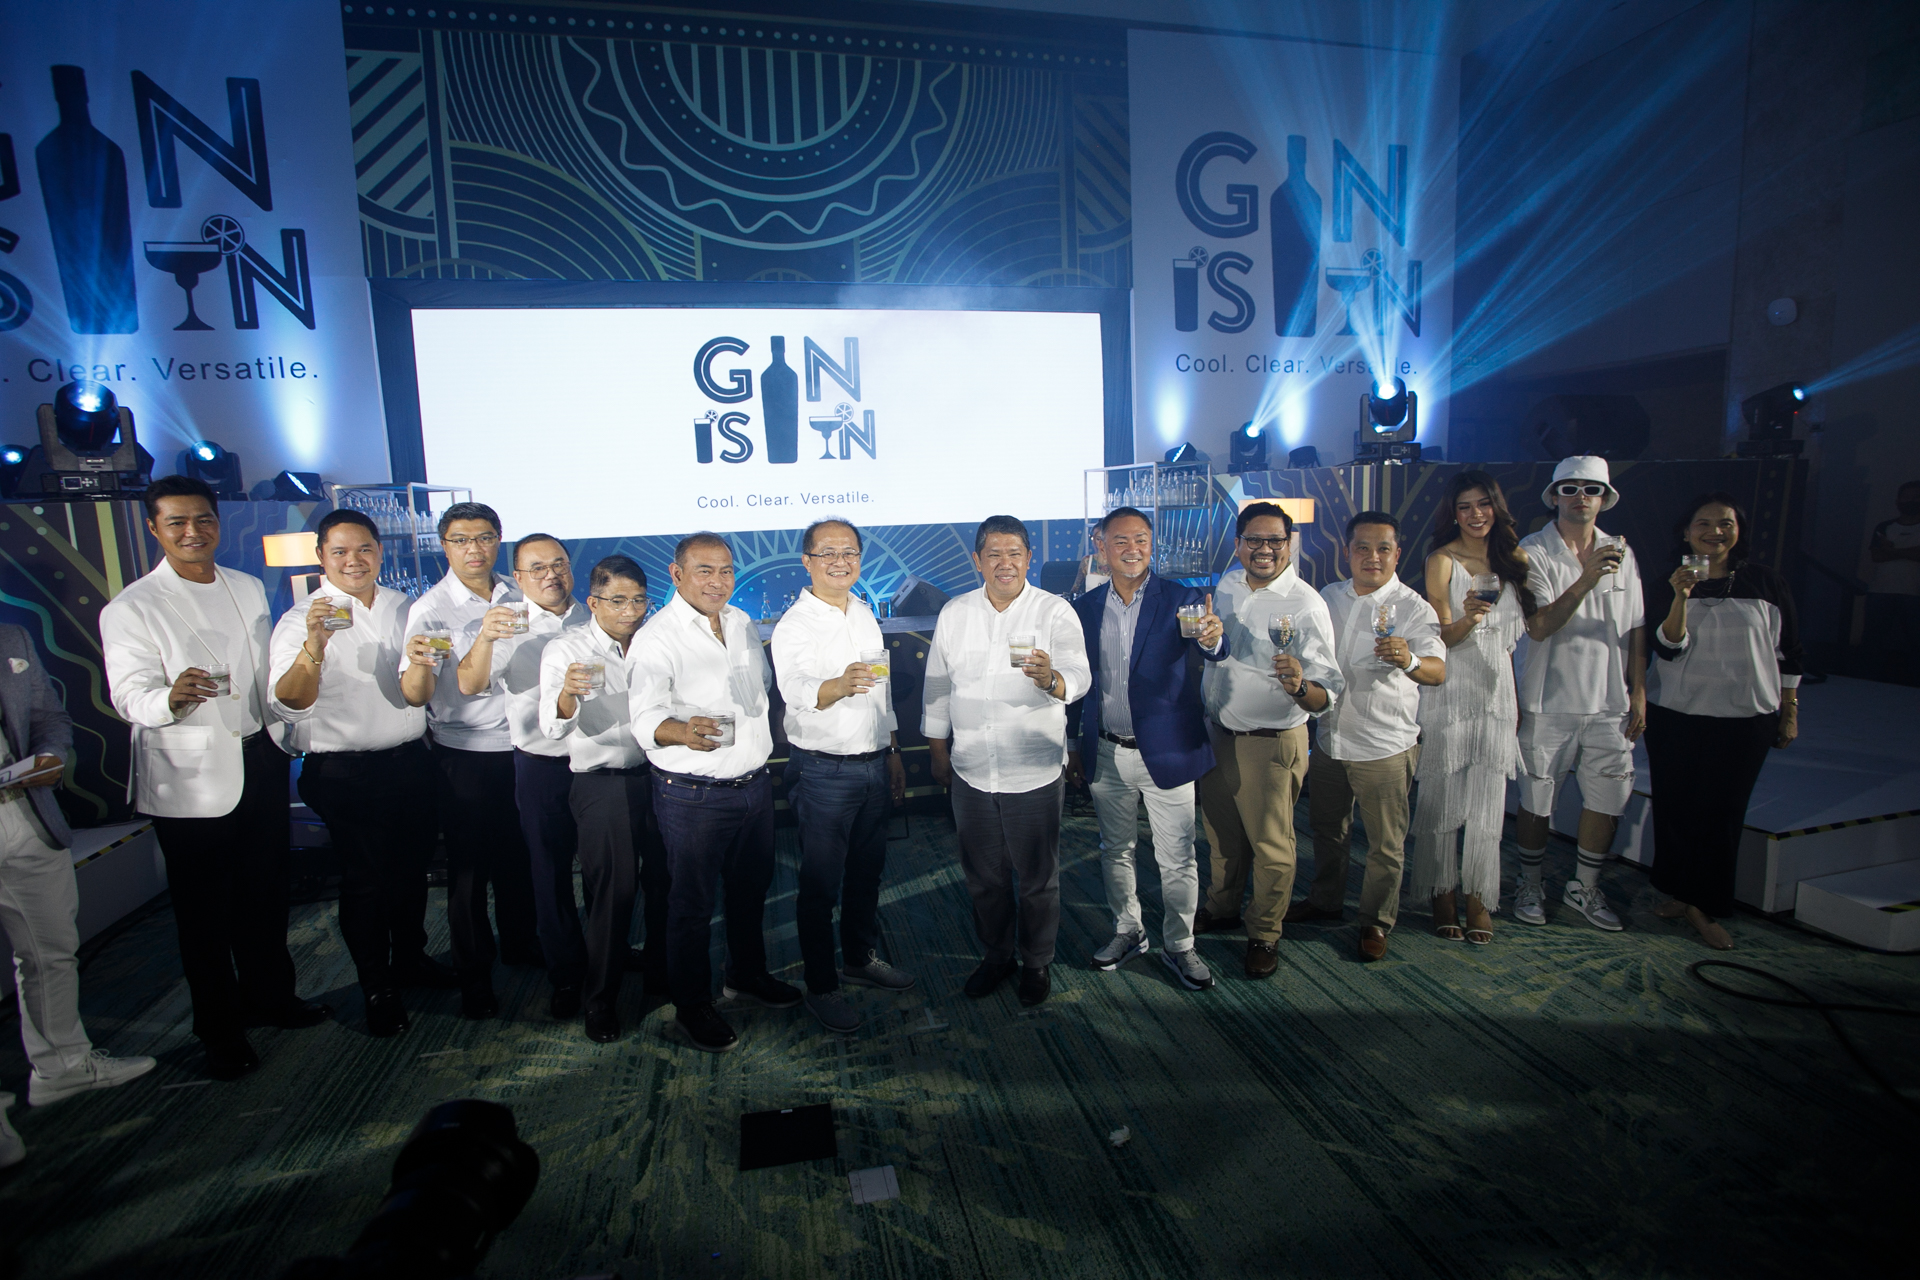 It's a ‘Cool, Clear, and Versatile’ quality of Ginebra Gin in celebration of "World Gin Day!"